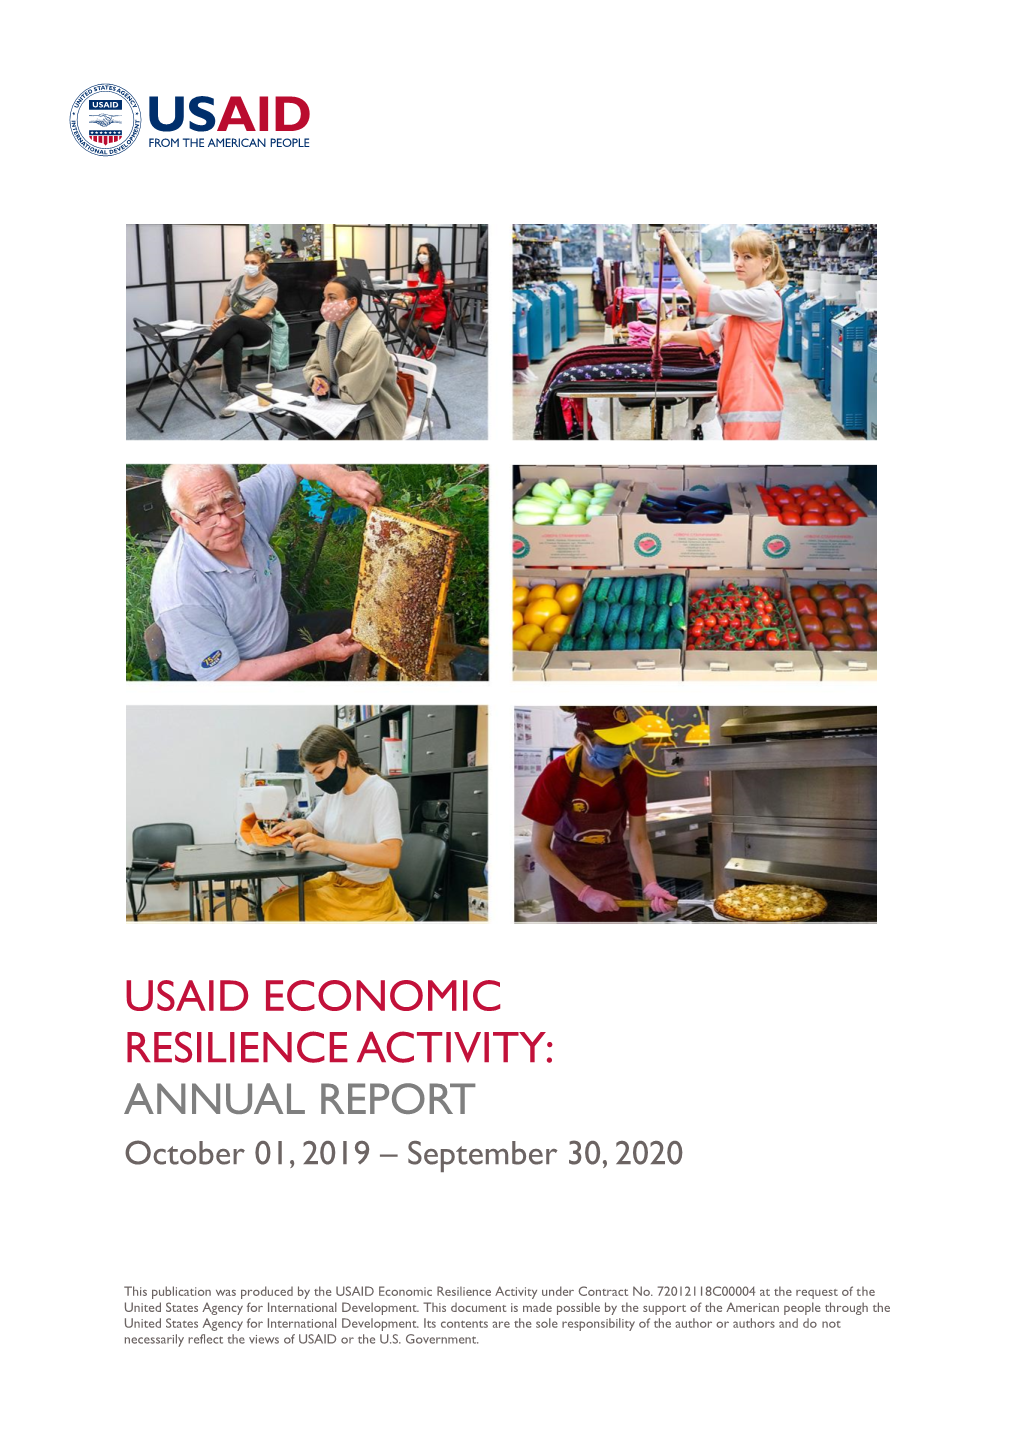 USAID ECONOMIC RESILIENCE ACTIVITY: ANNUAL REPORT October 01, 2019 – September 30, 2020